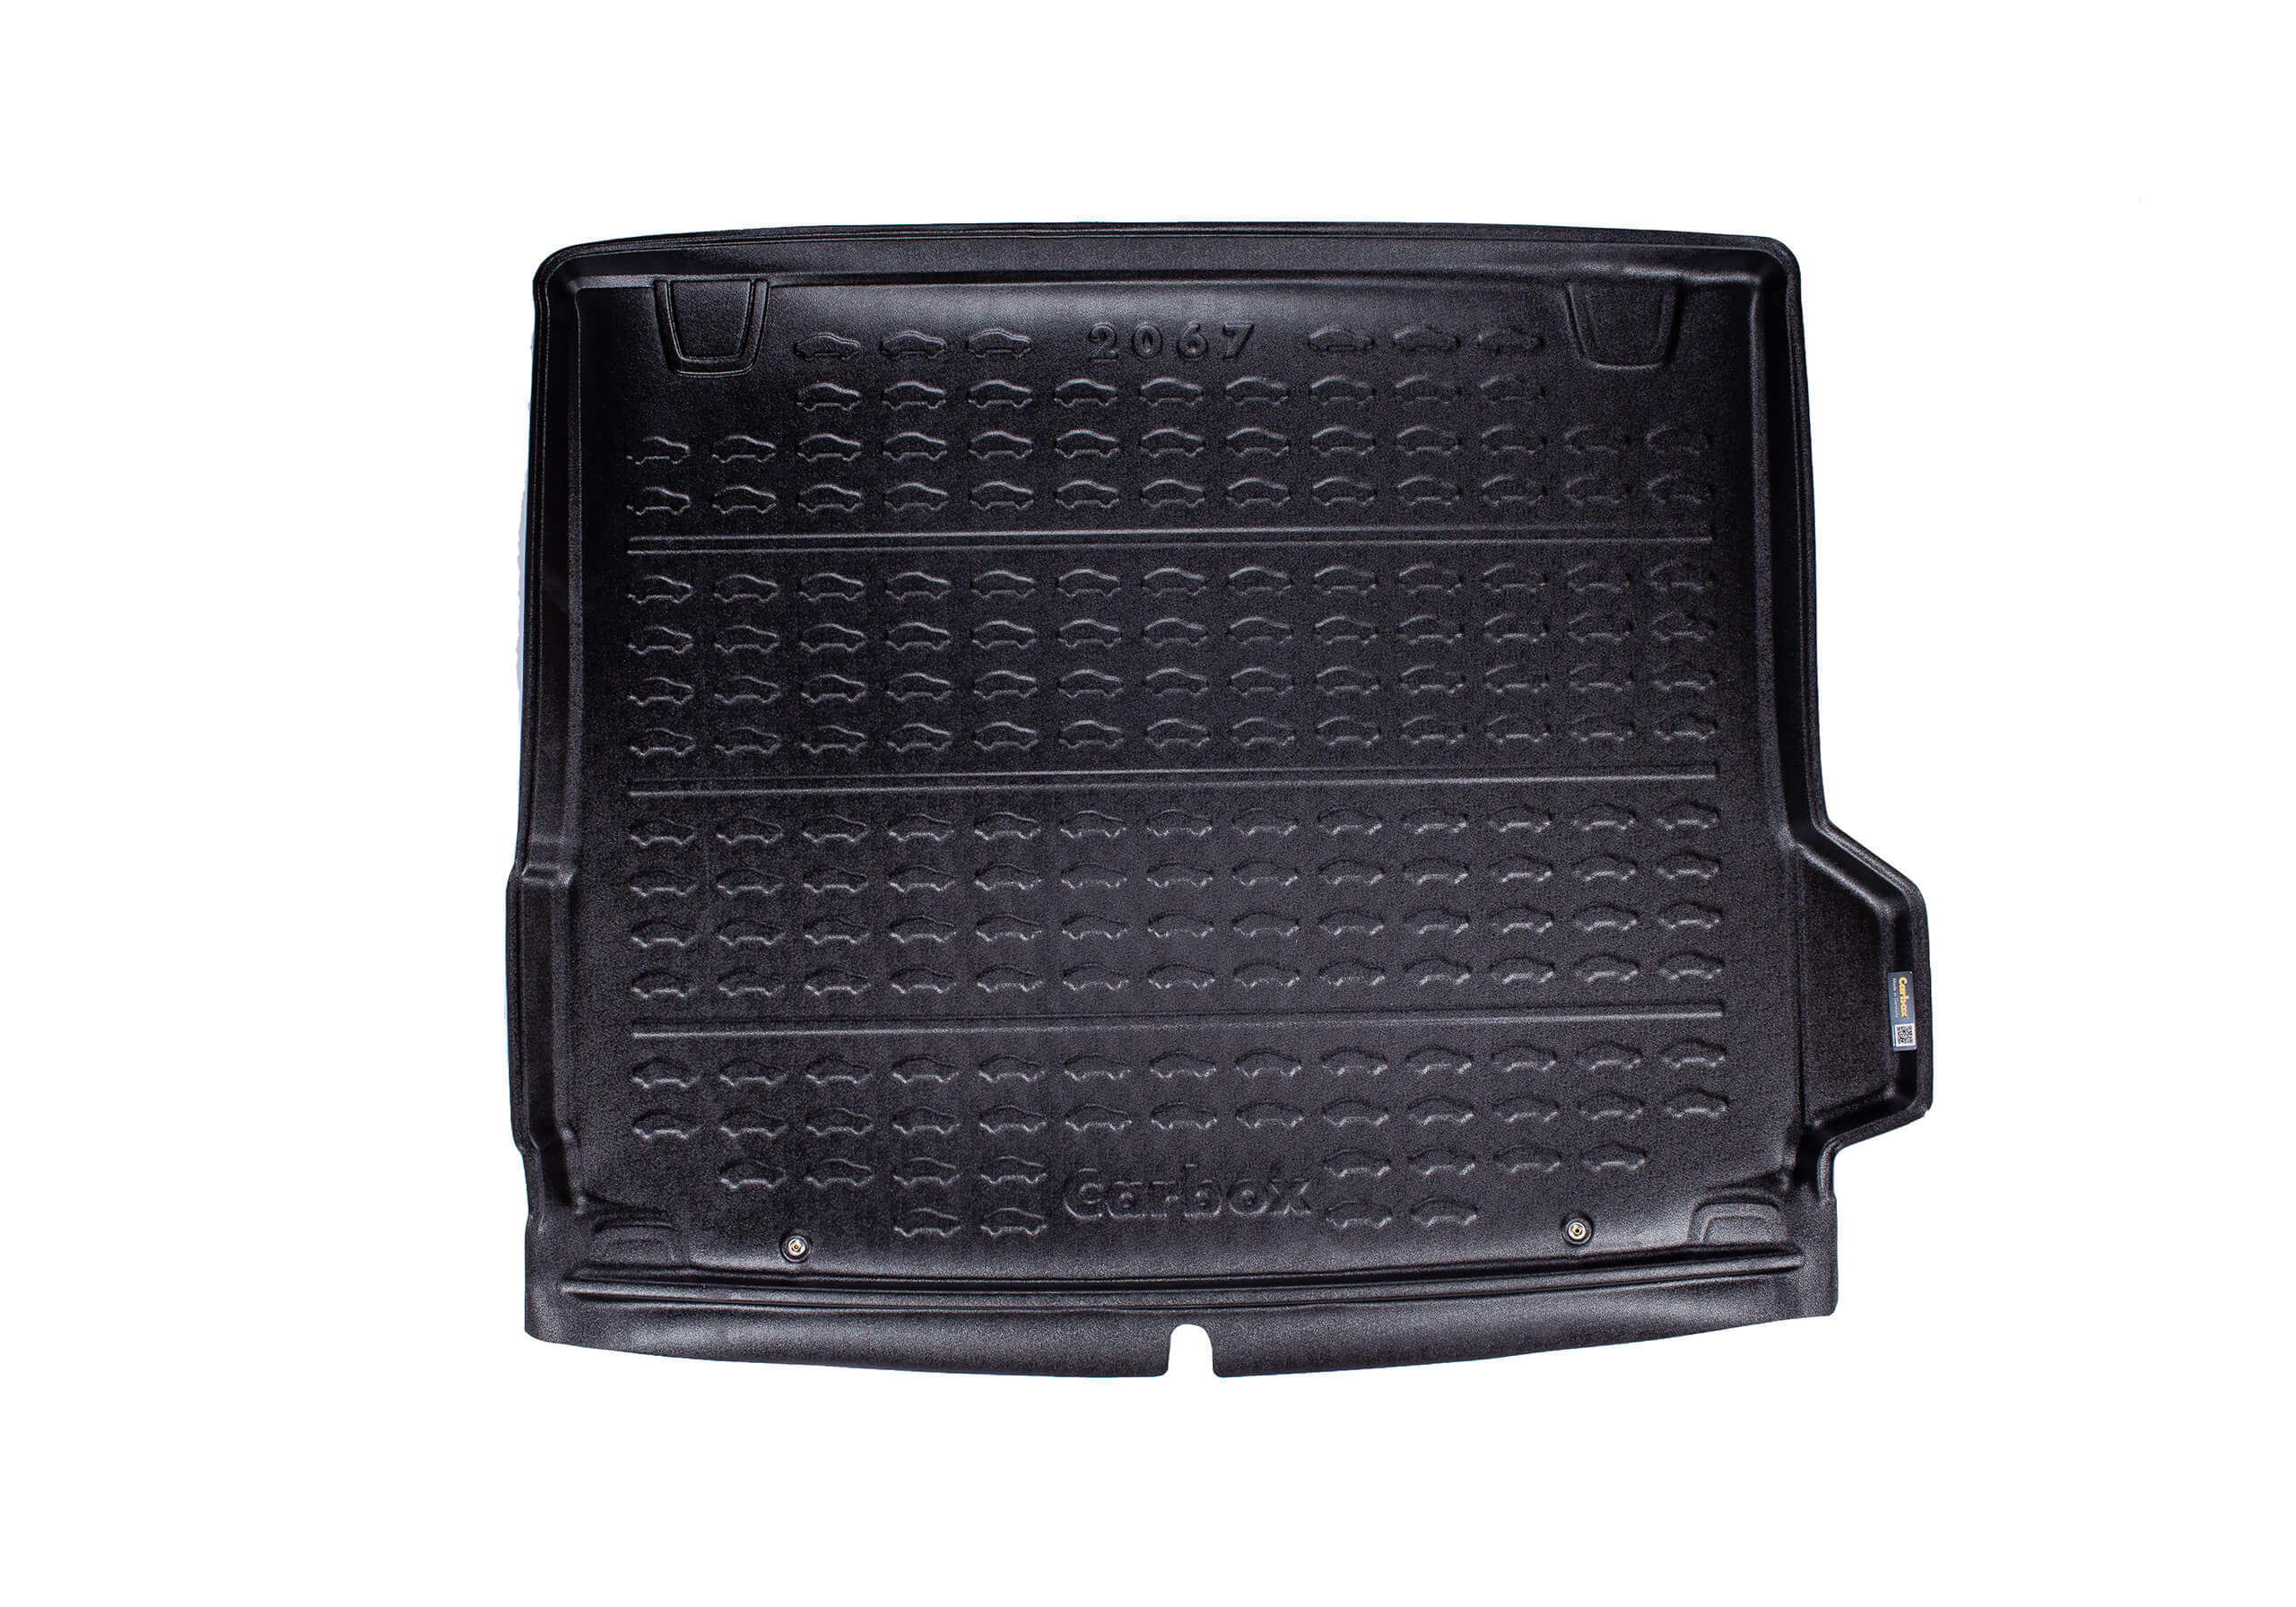 BMW X3 (2018 onwards):Carbox Form S boot liner, black, for BMW X3, 202067000